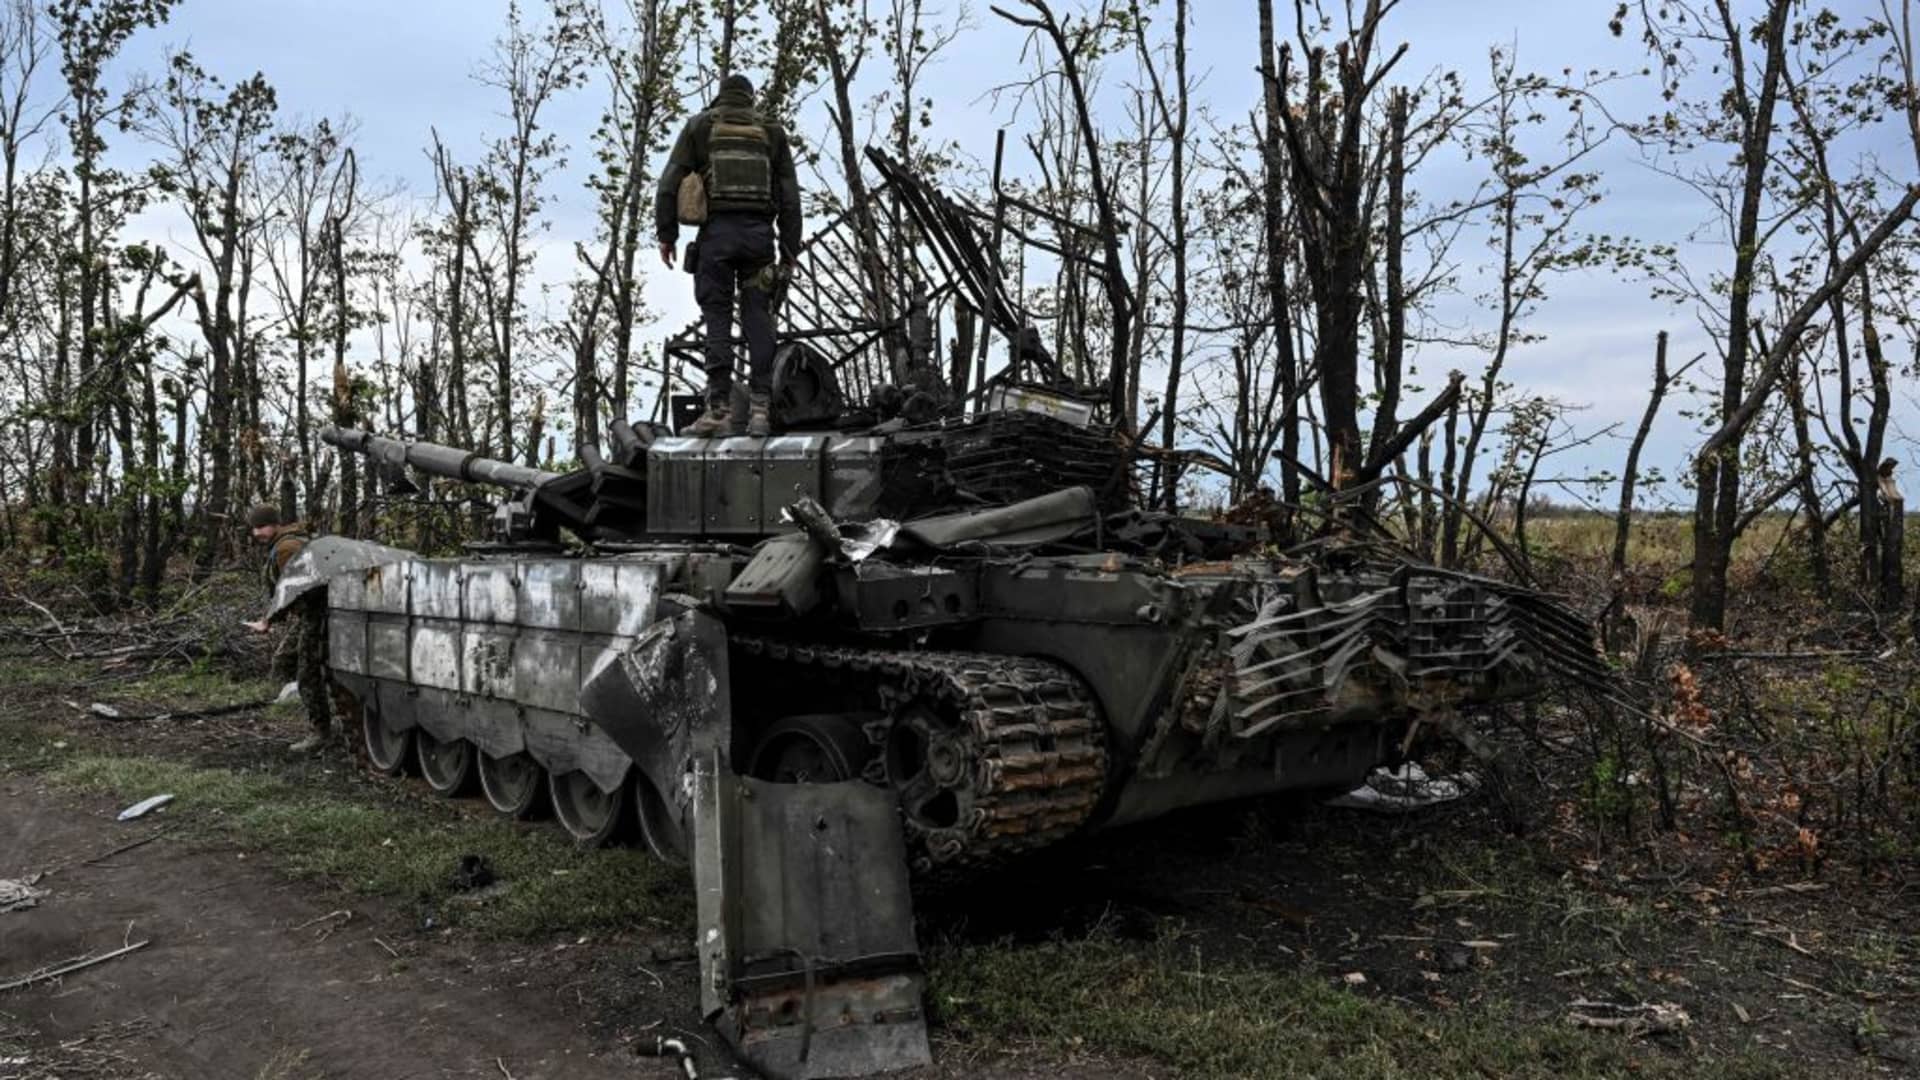 This photograph taken on September 11, 2022, shows a Ukrainian soldier standing atop an abandoned Russian tank near a village on the outskirts of Izyum, Kharkiv Region, eastern Ukraine, amid the Russian invasion of Ukraine.